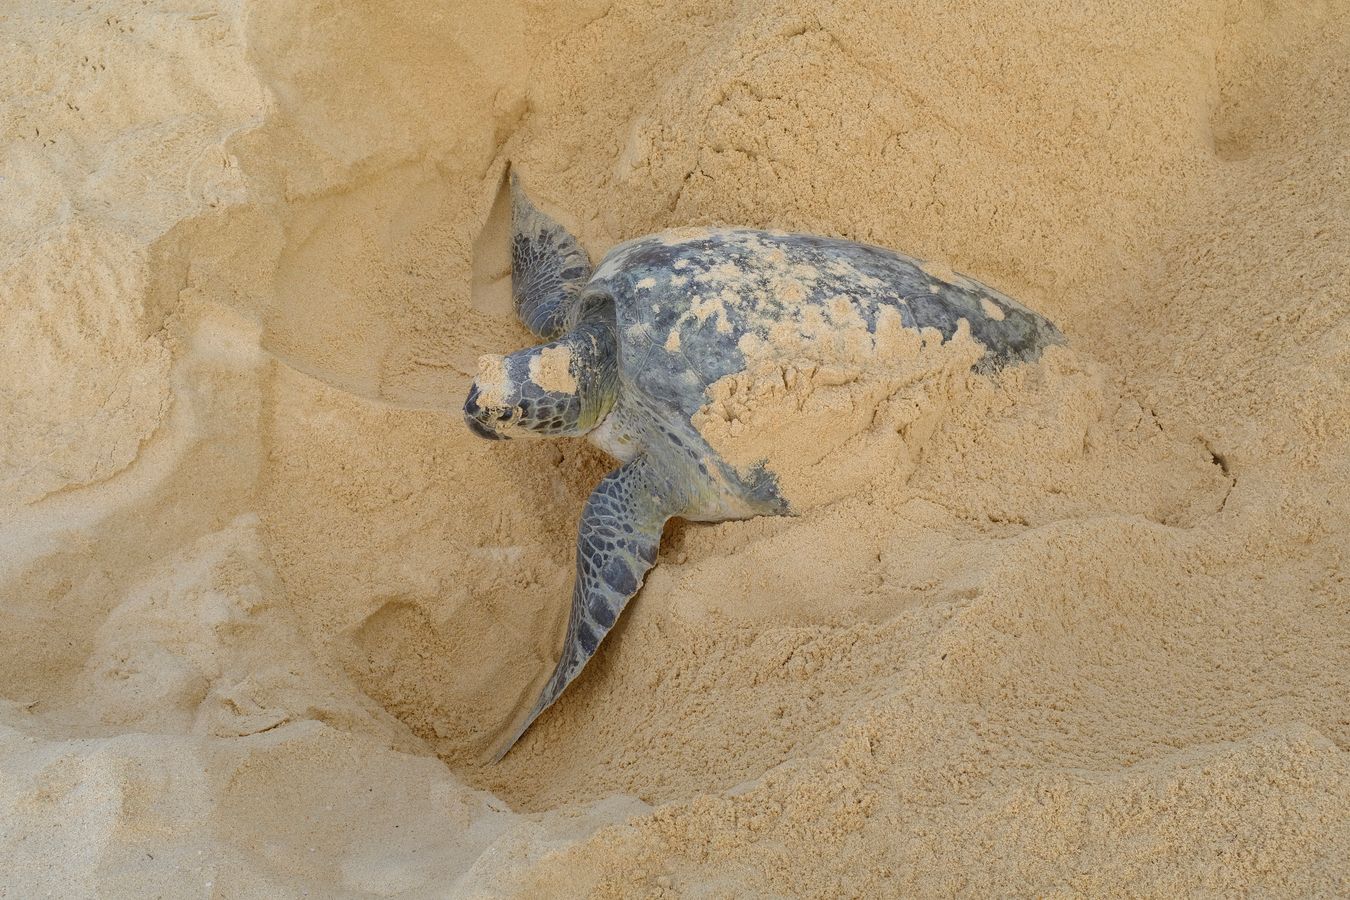 Green turtle uses its front flippers to cover the nest where it has just spawned with sand.